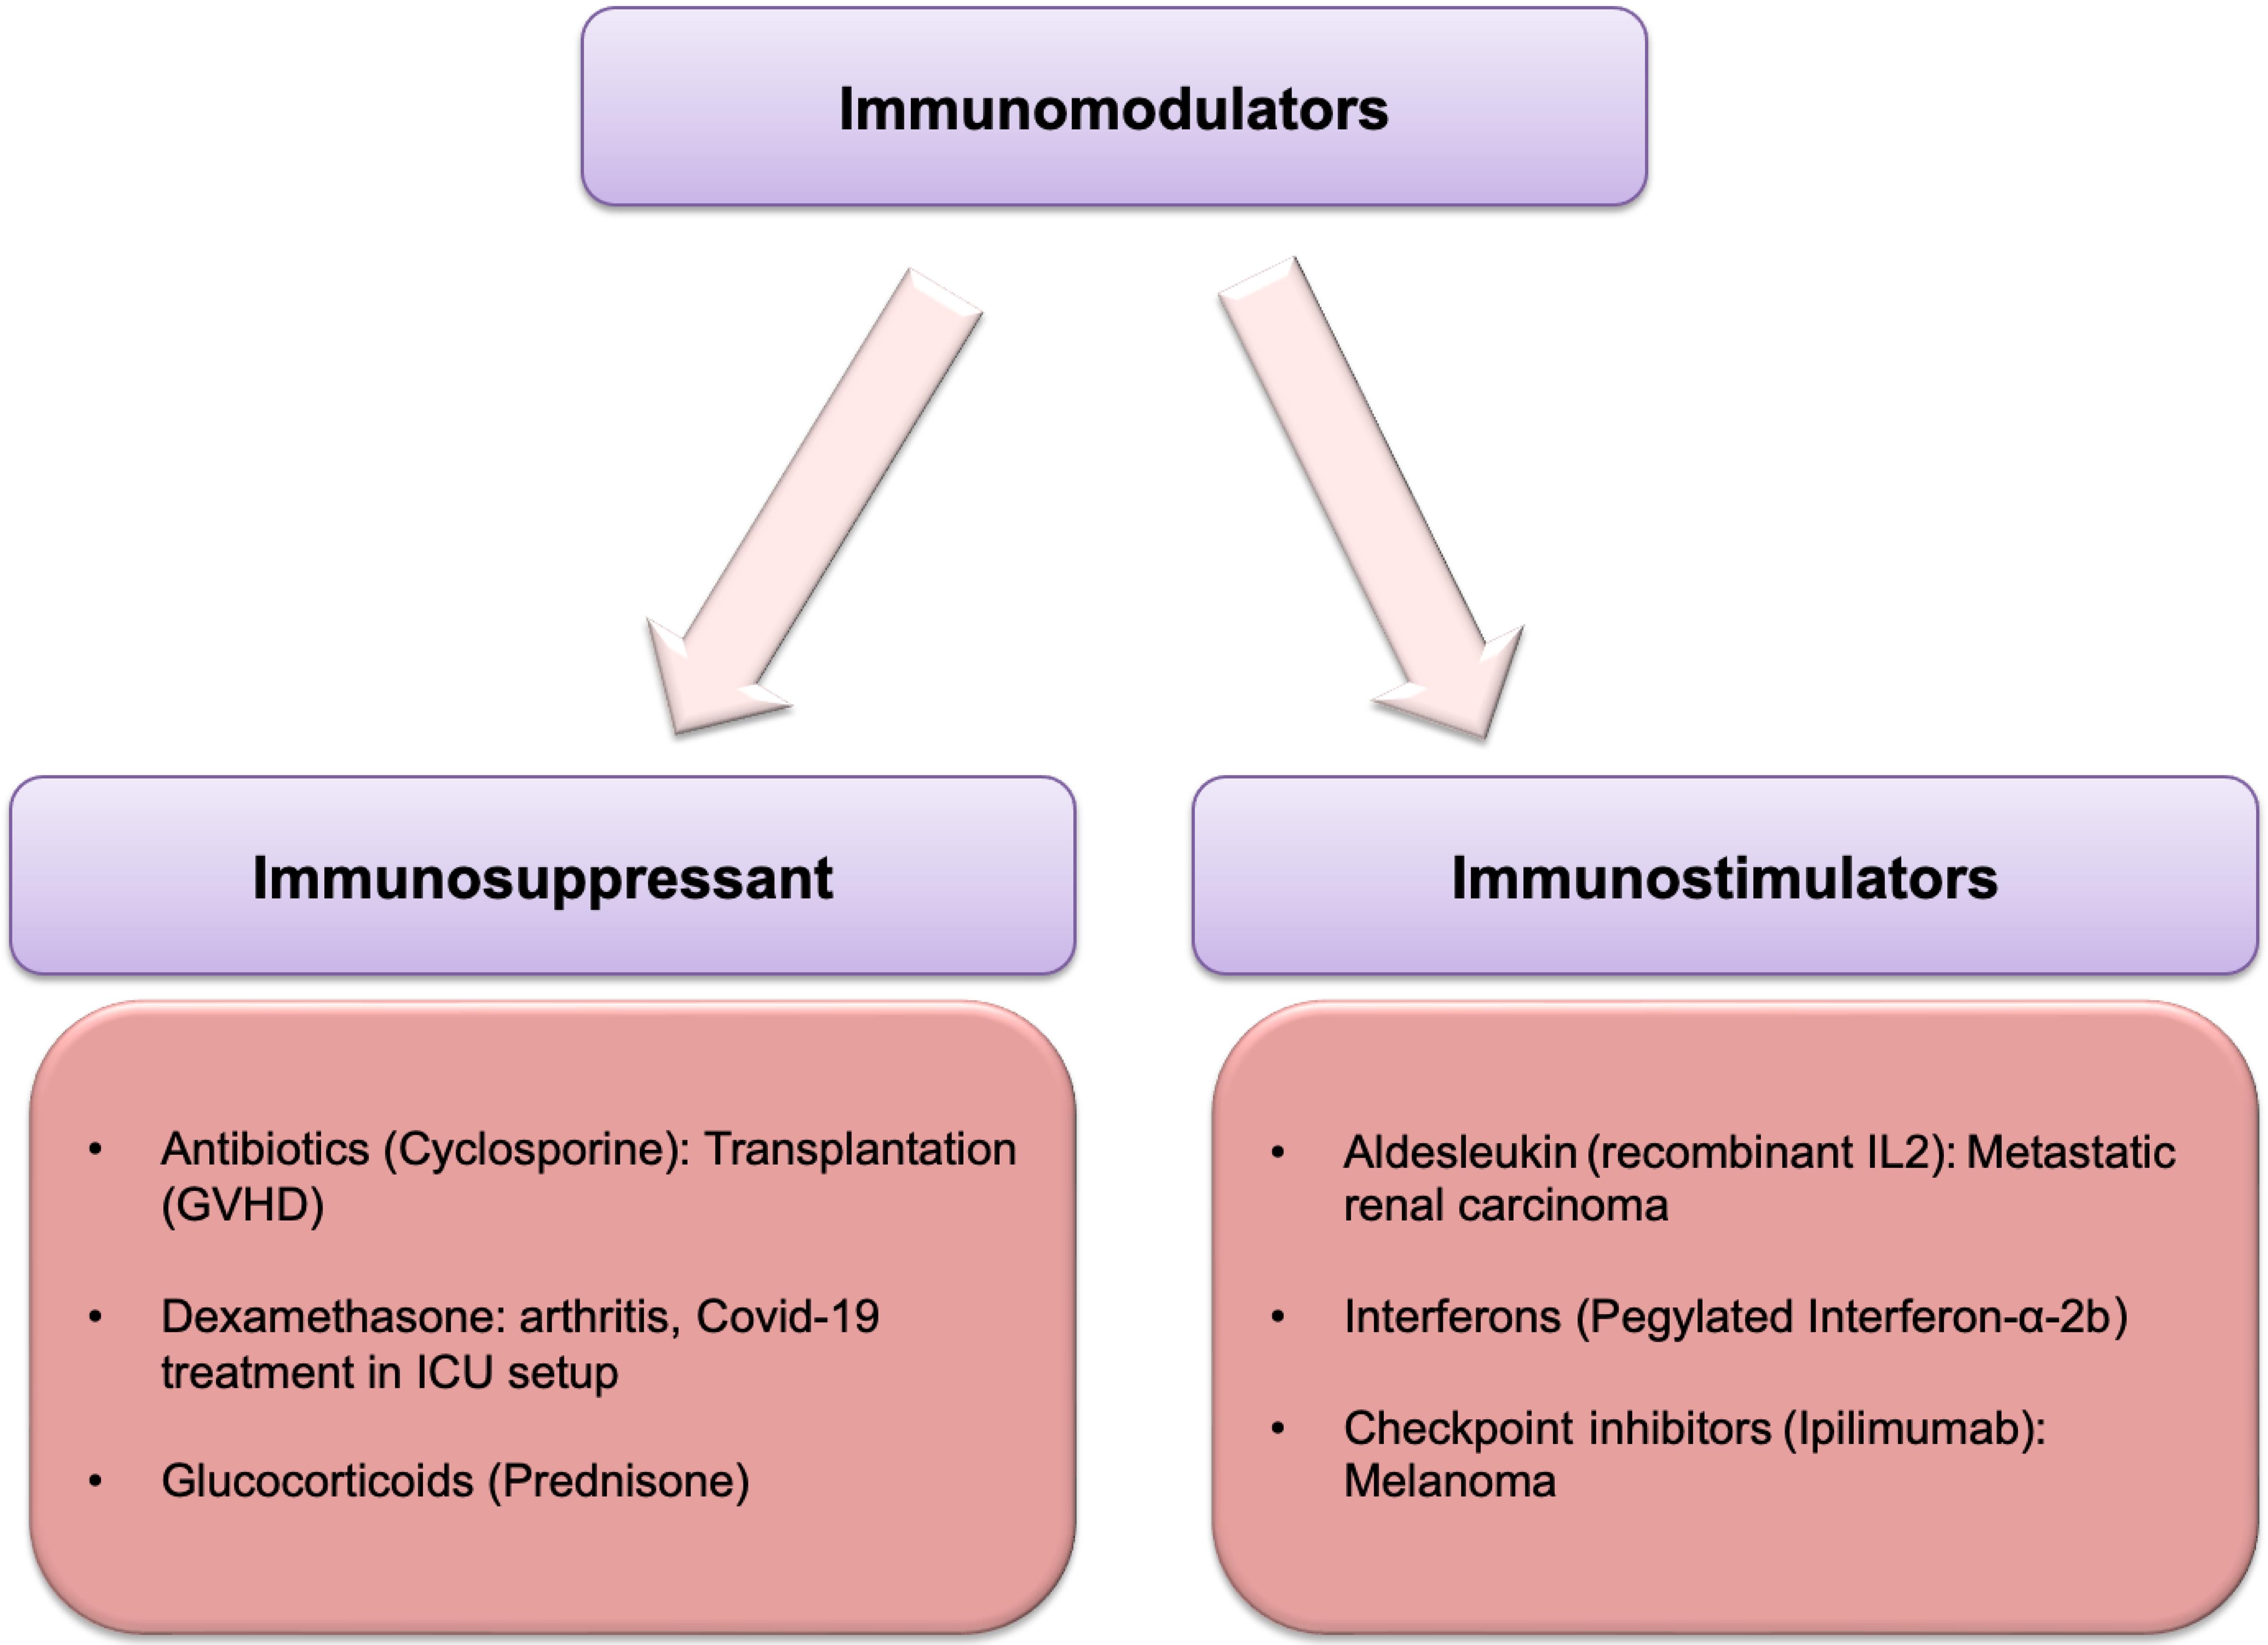 Immunomodulators are a class of molecules that modulate different immune cell responses, thereby preventing life-threatening diseases.